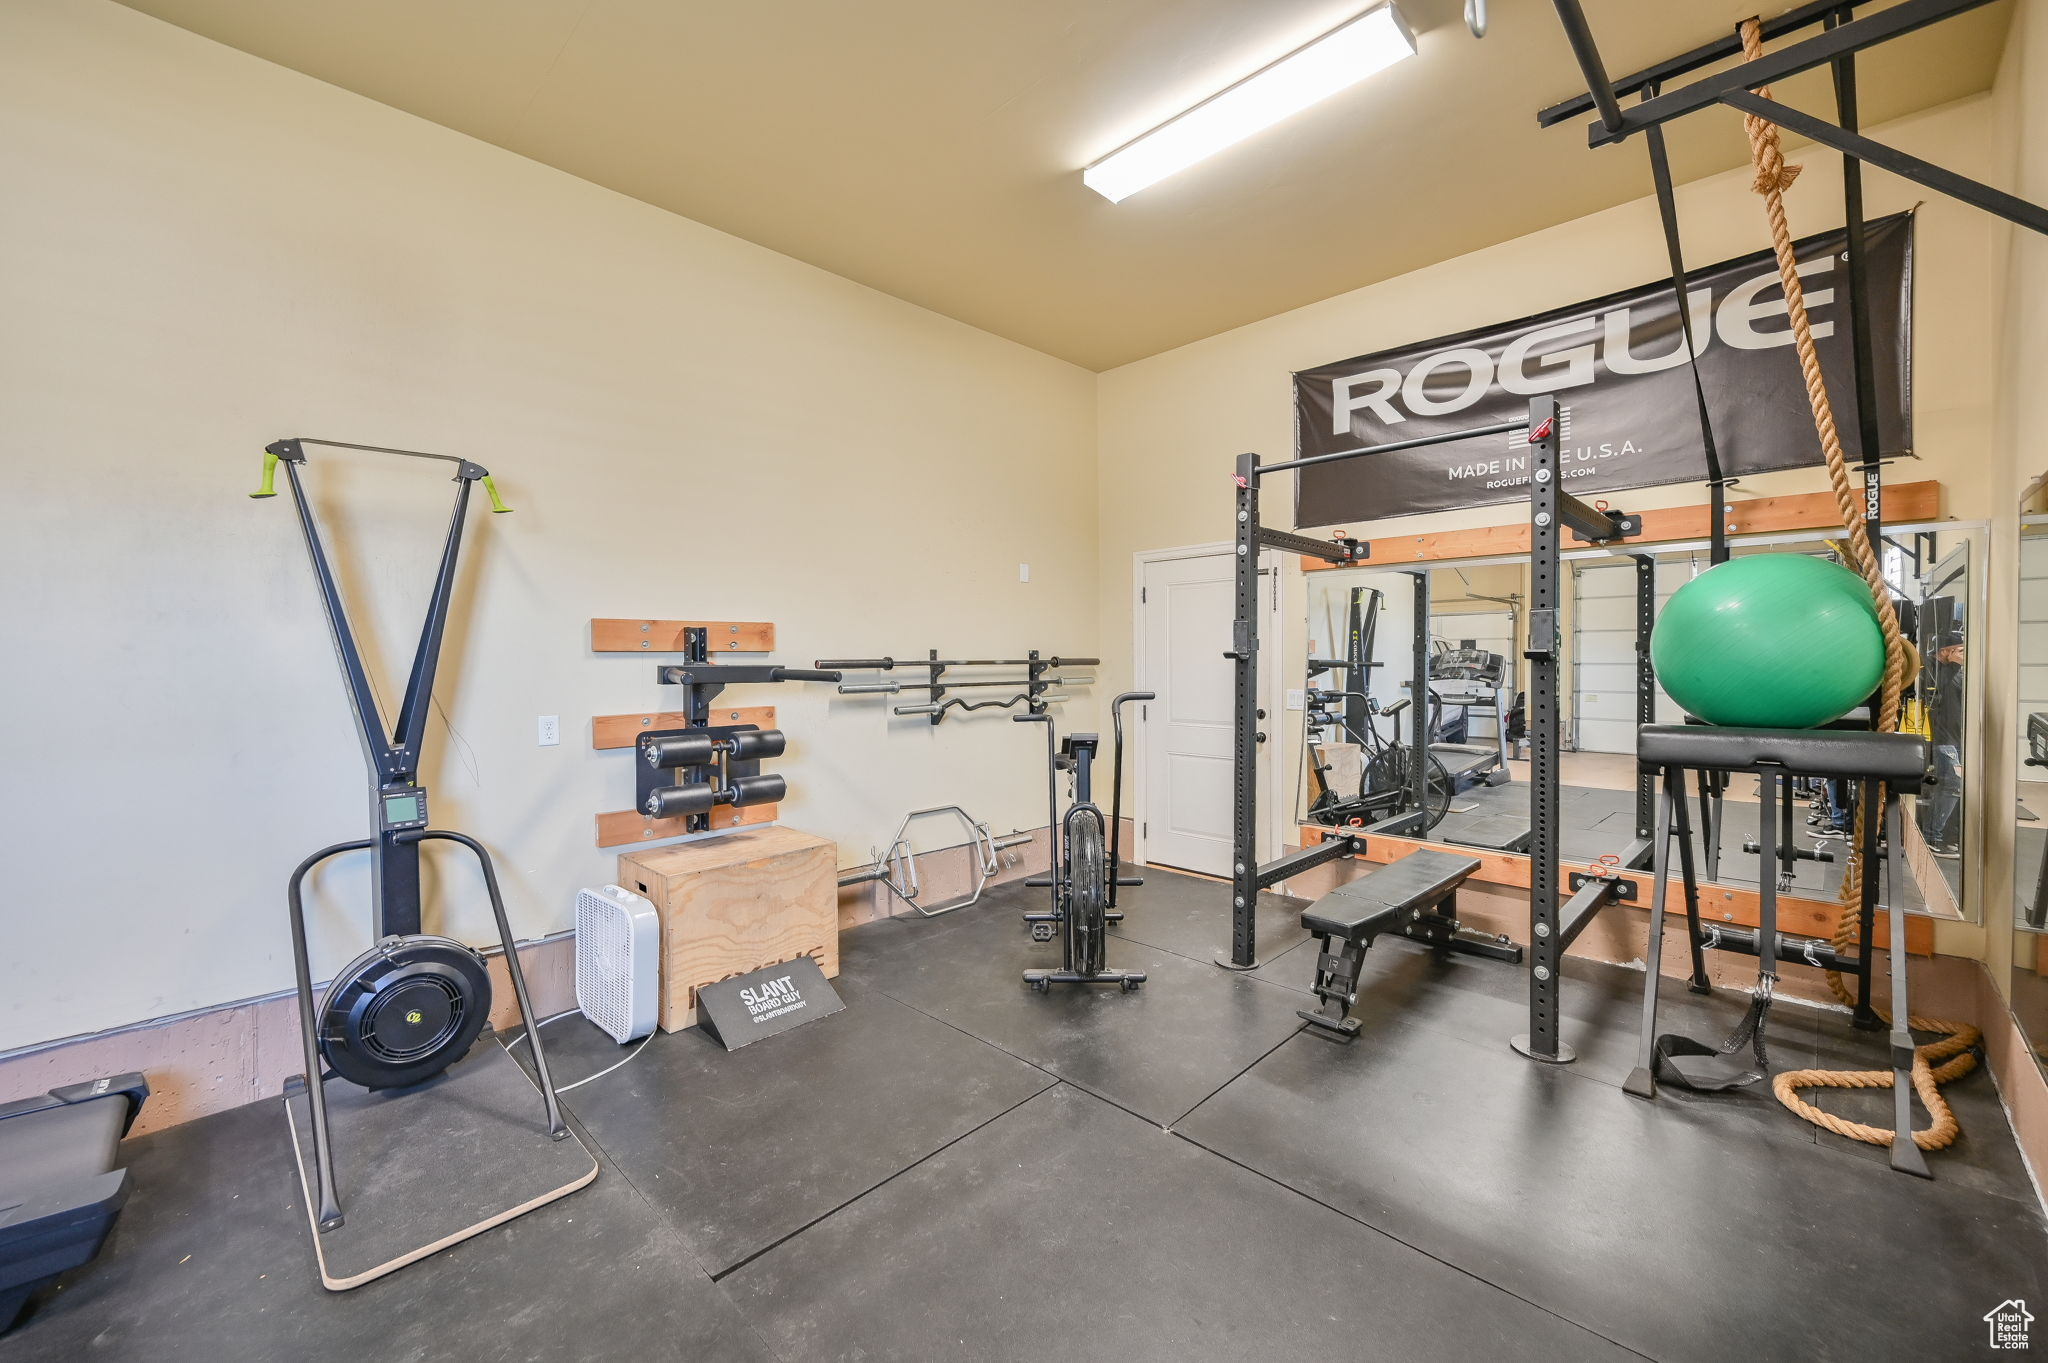 View of the exercise area in the garage